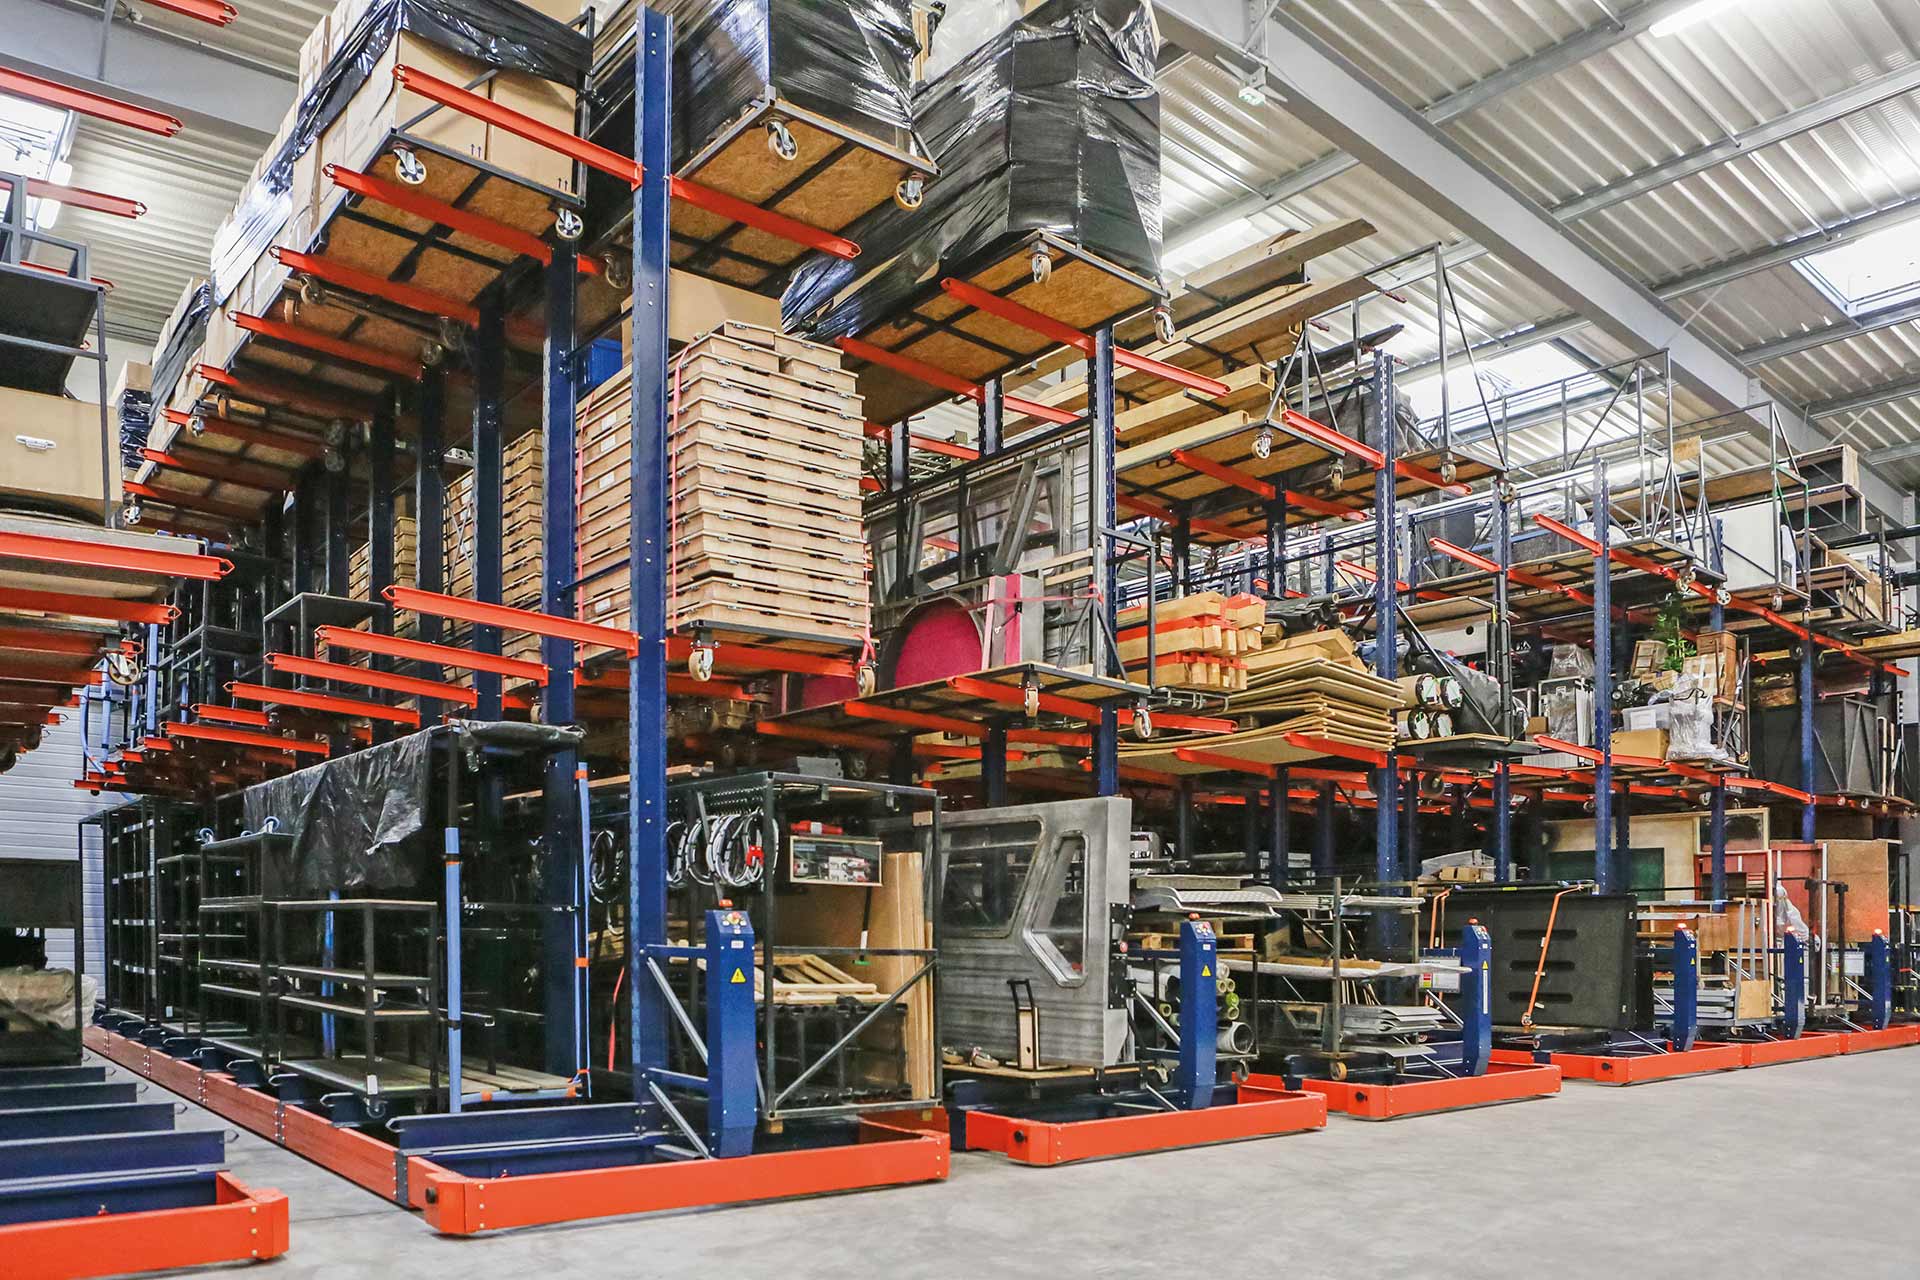 The Movirack system can be combined with cantilever racks to store irregular-shaped goods such as tubes or metal sheeting